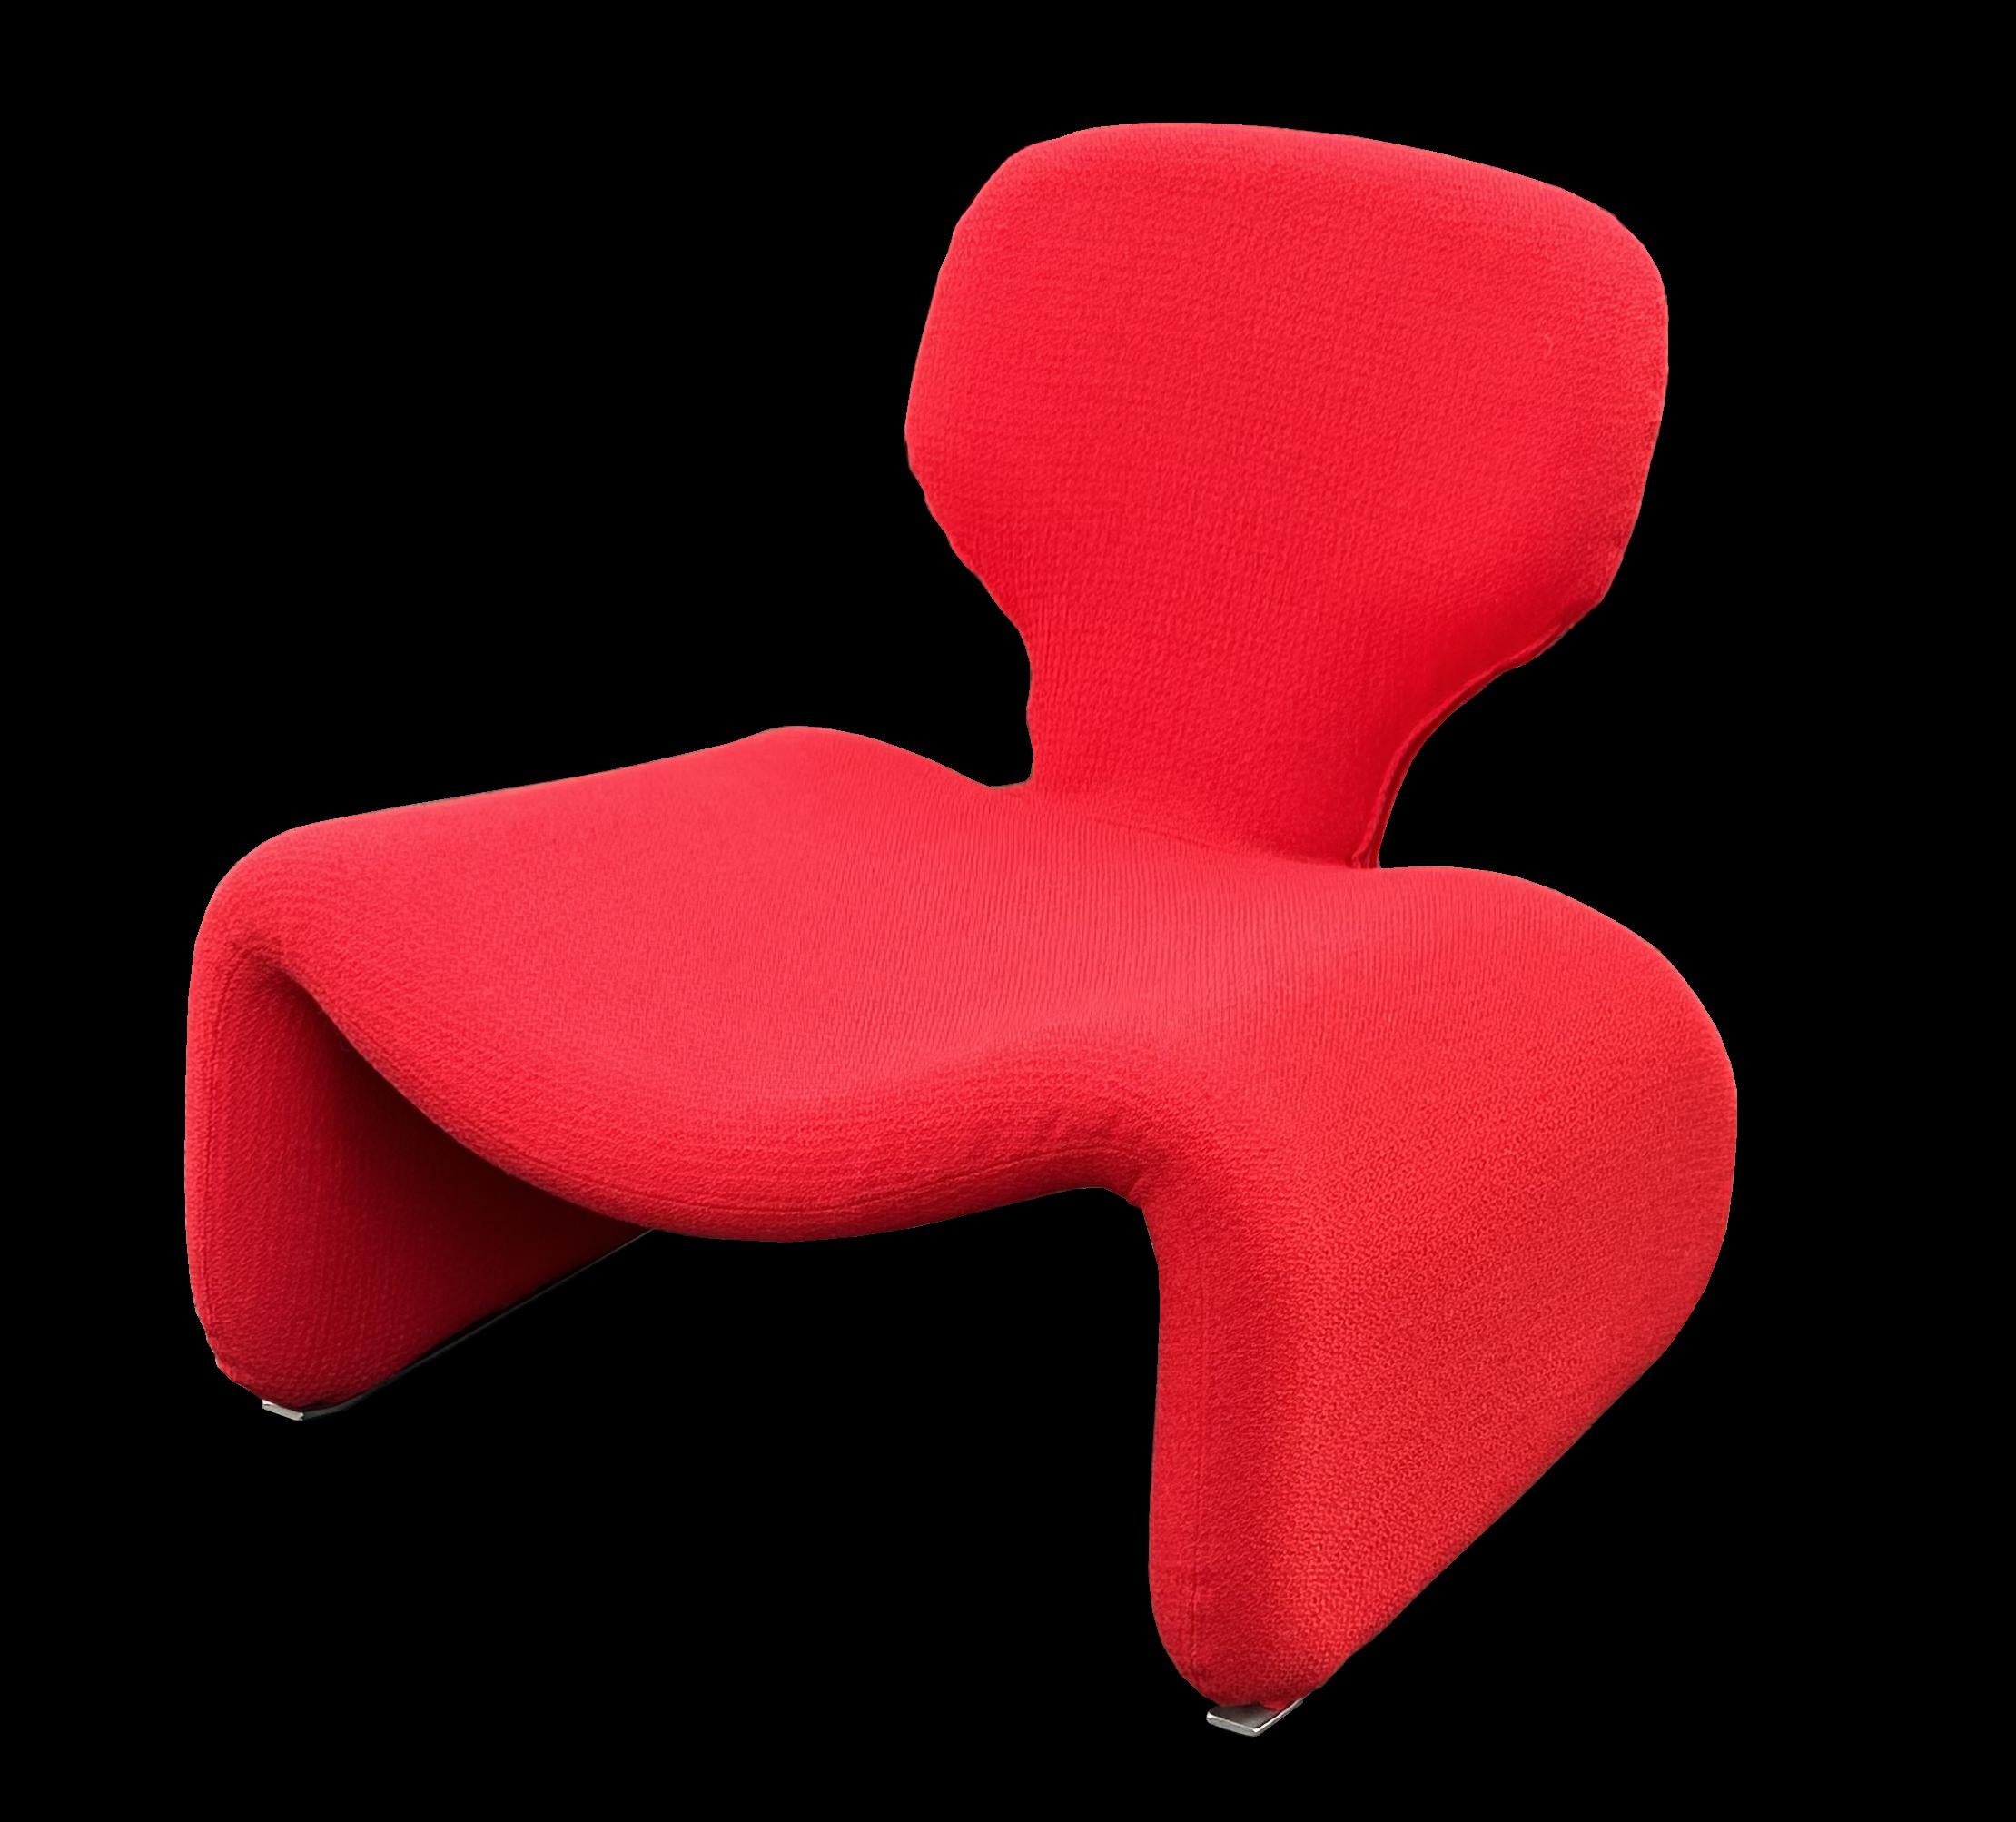 Steel Djinn Chair by Olivier Mourgue for Airborne